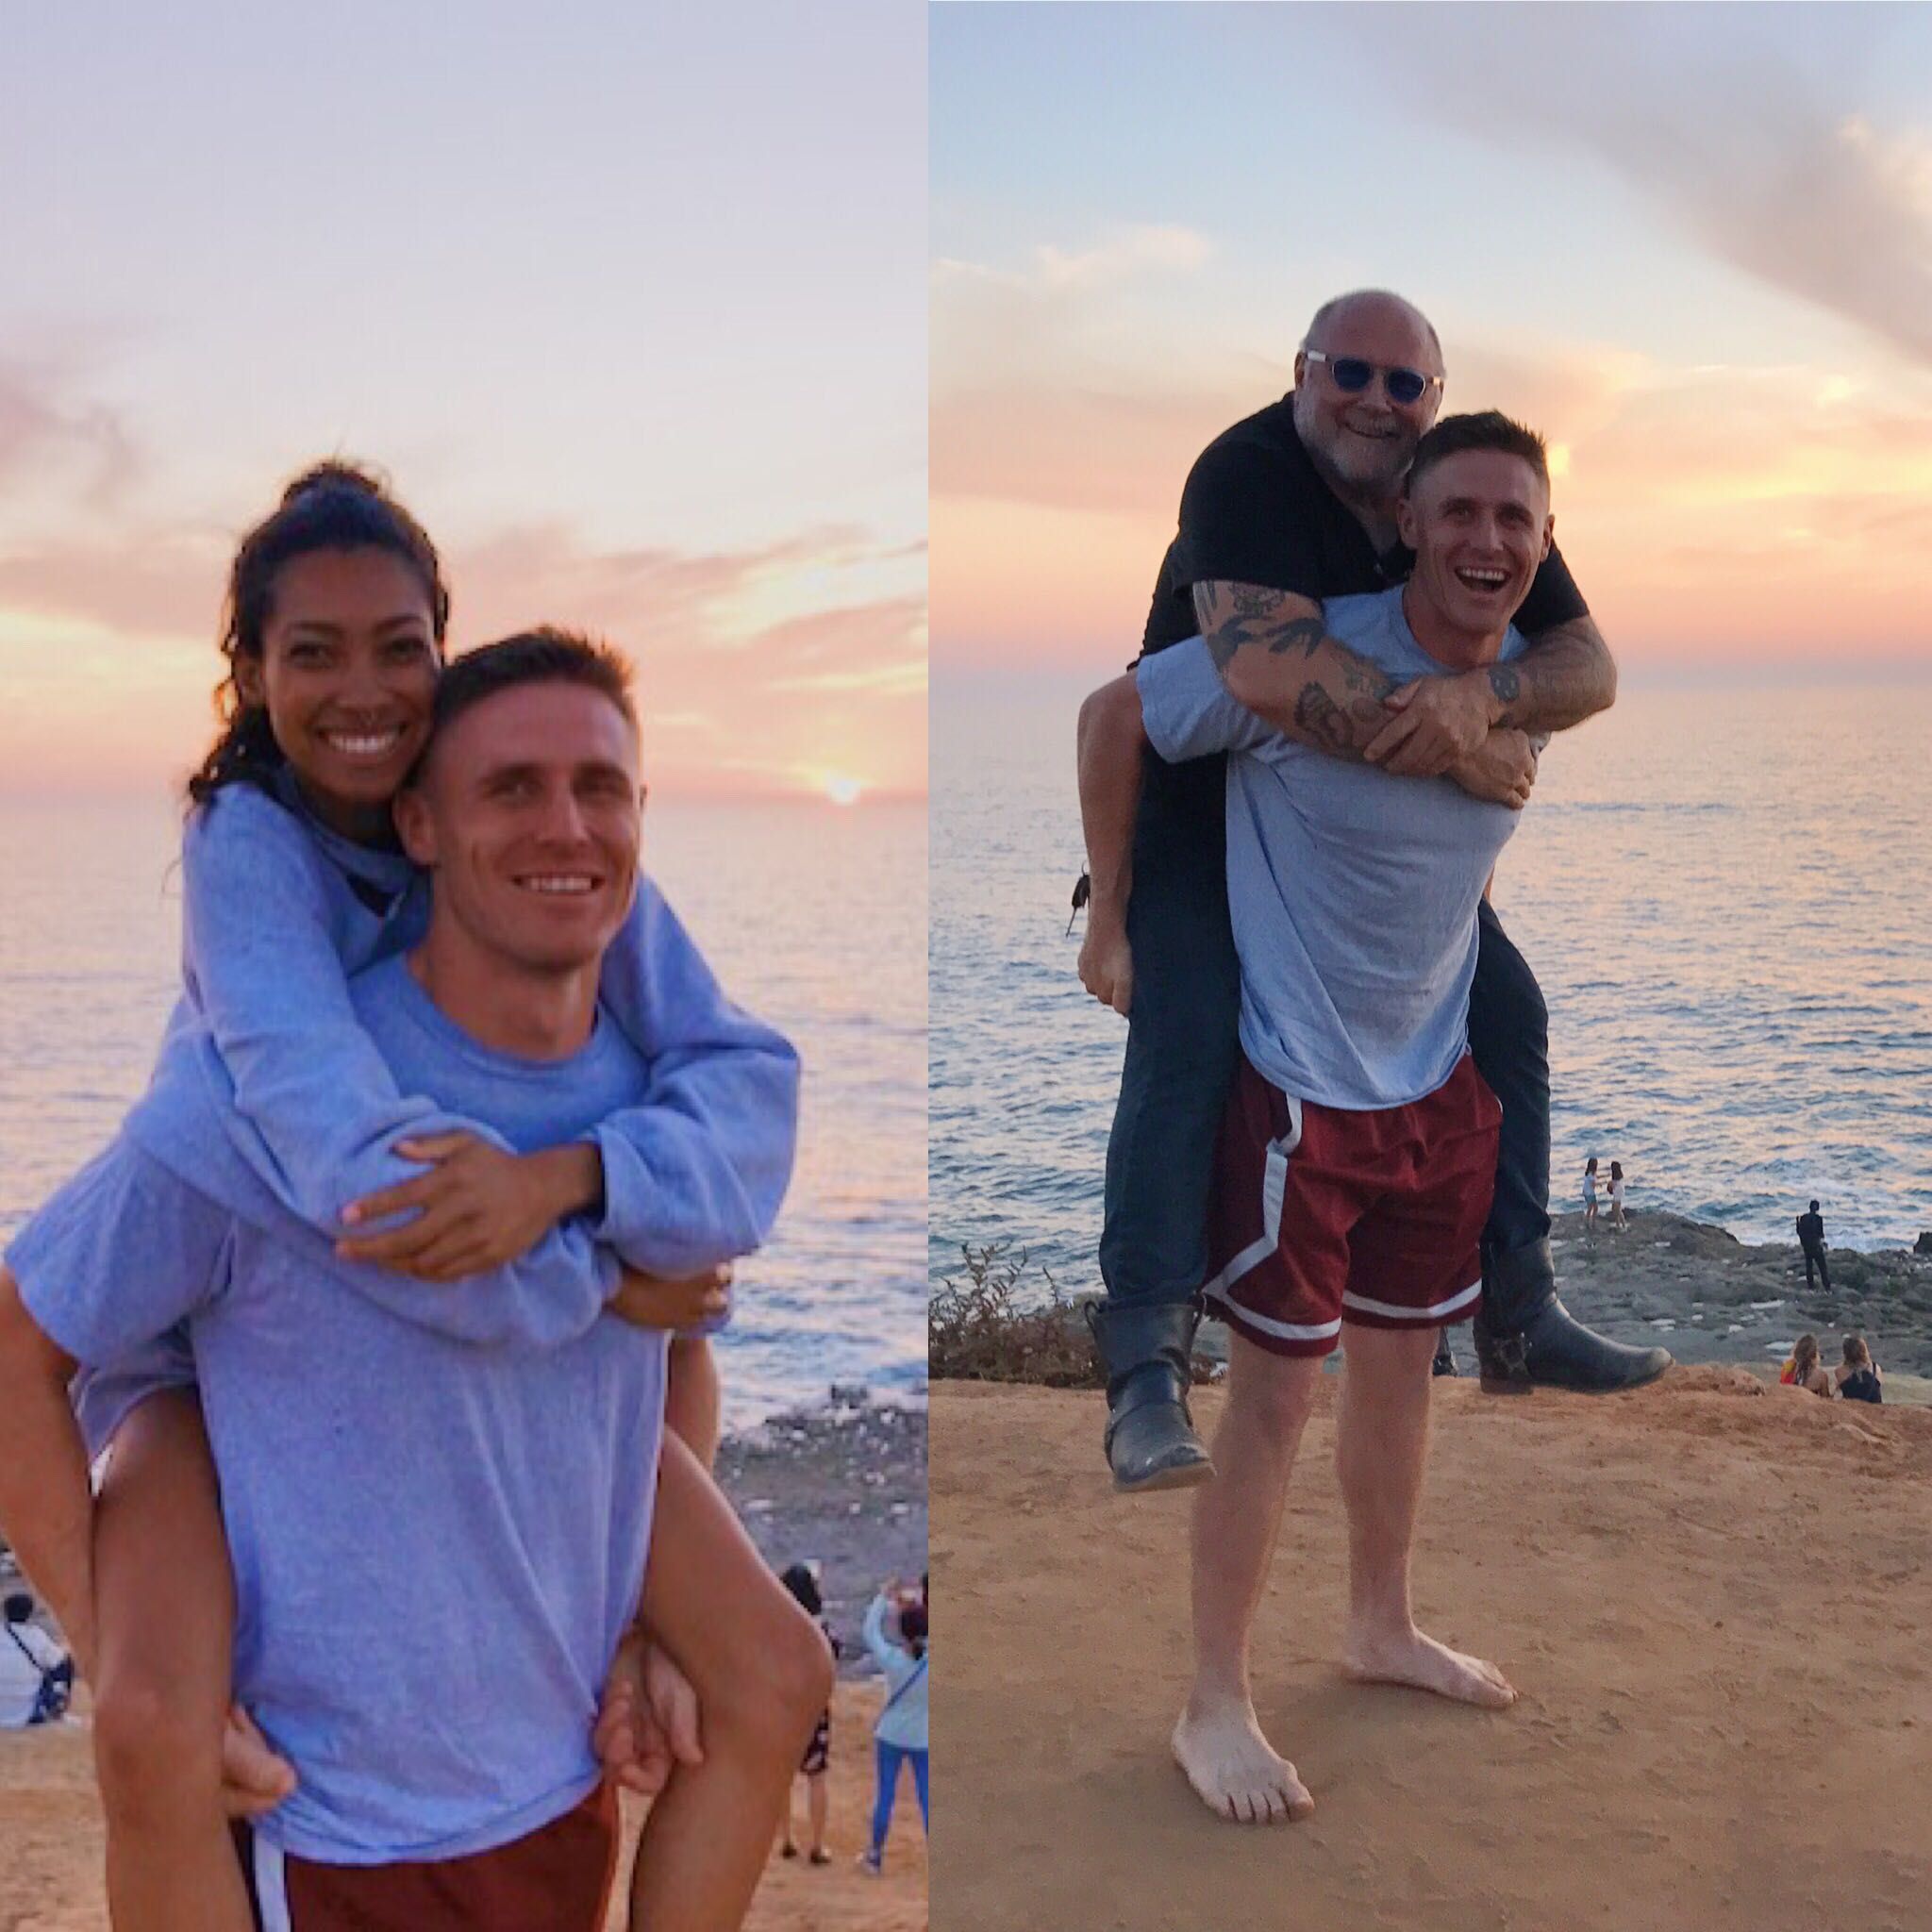 My lady friend wanted a piggy back picture on the beach and a random biker watching the sunset said he wanted one too.